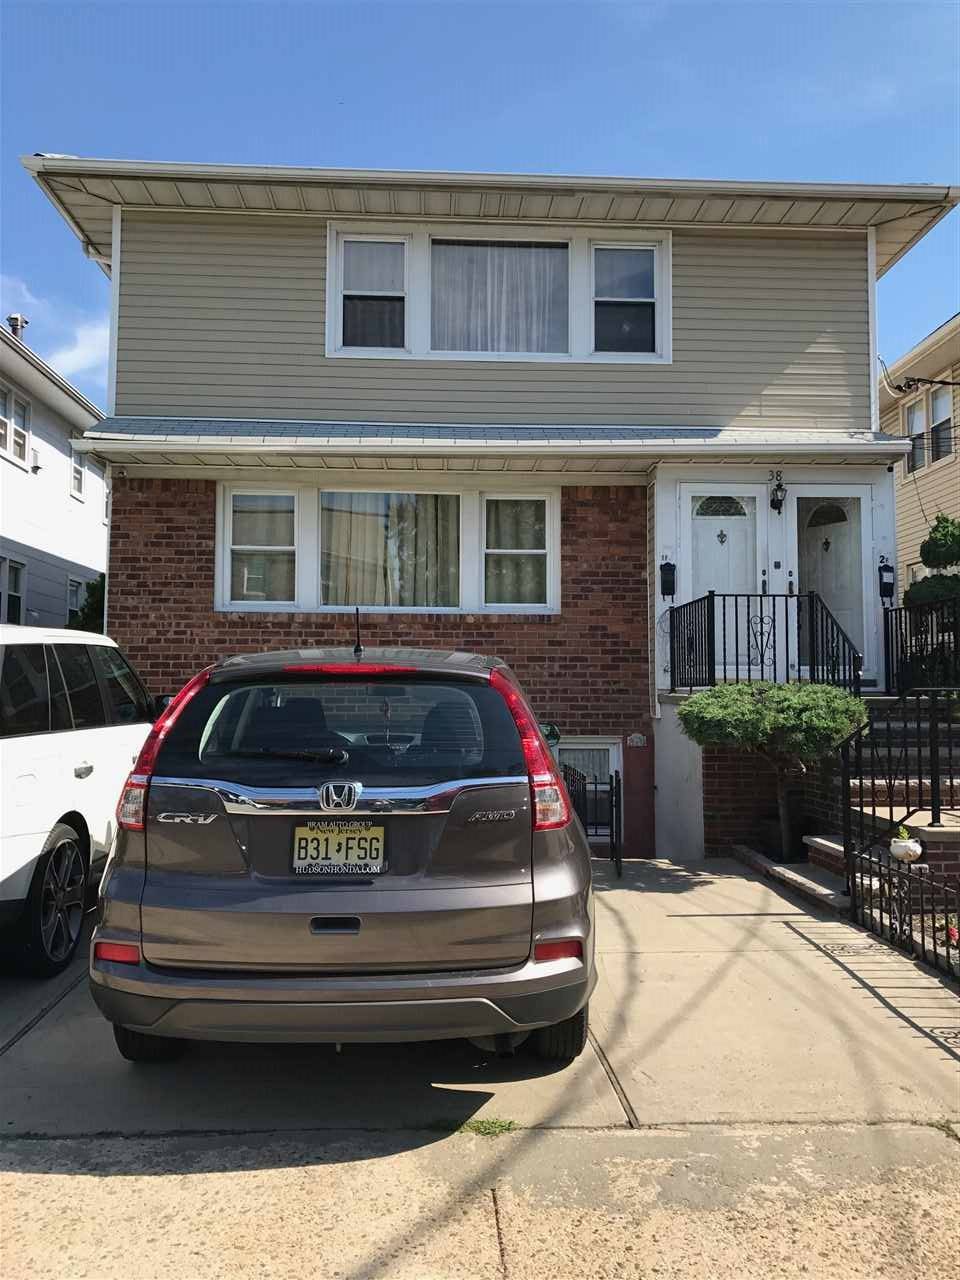 impeccable - 3 BR New Jersey